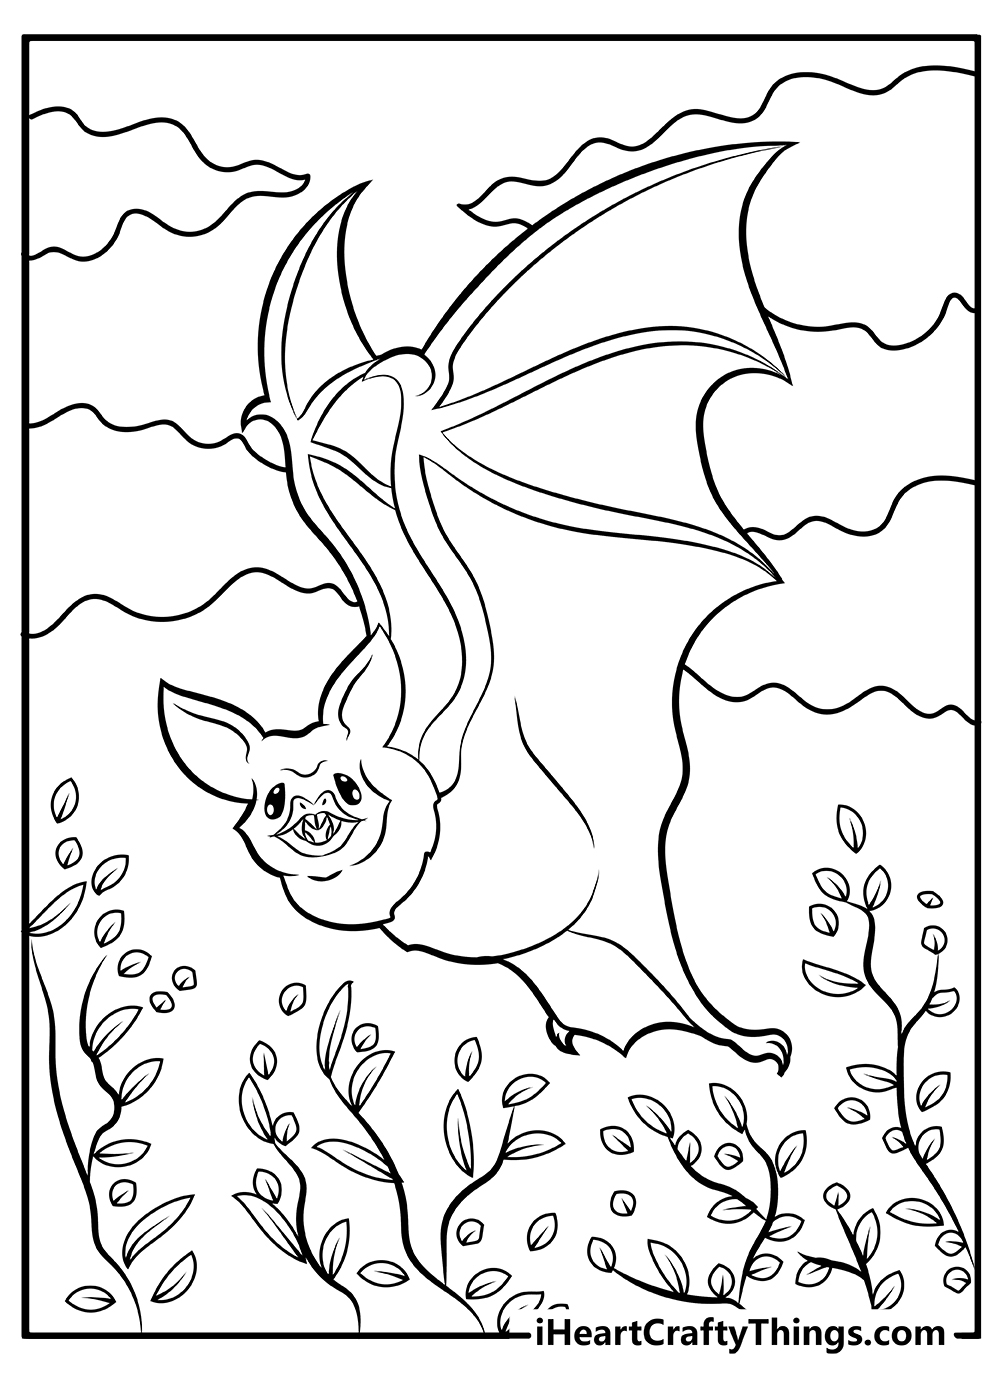 Bat coloring pages free printables